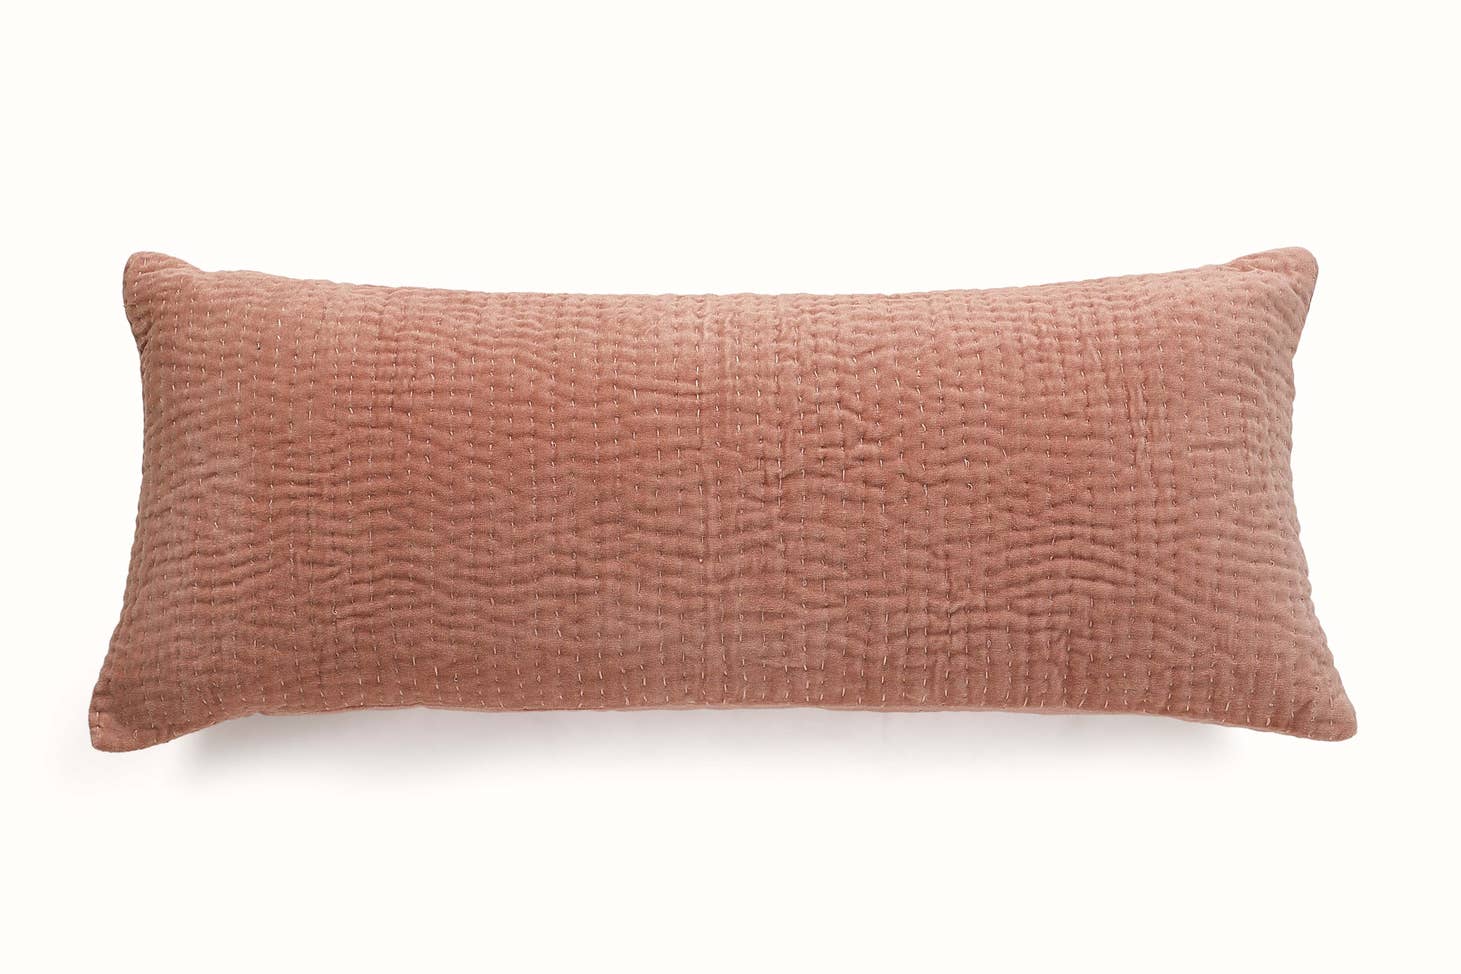 Casa Amarosa Plush Velvet Kantha Lumbar Pillow : Plush velvet meets this lumbar cushion's solid style, which is created using an ancient stitching technique, Kantha.  Ethically made in India.